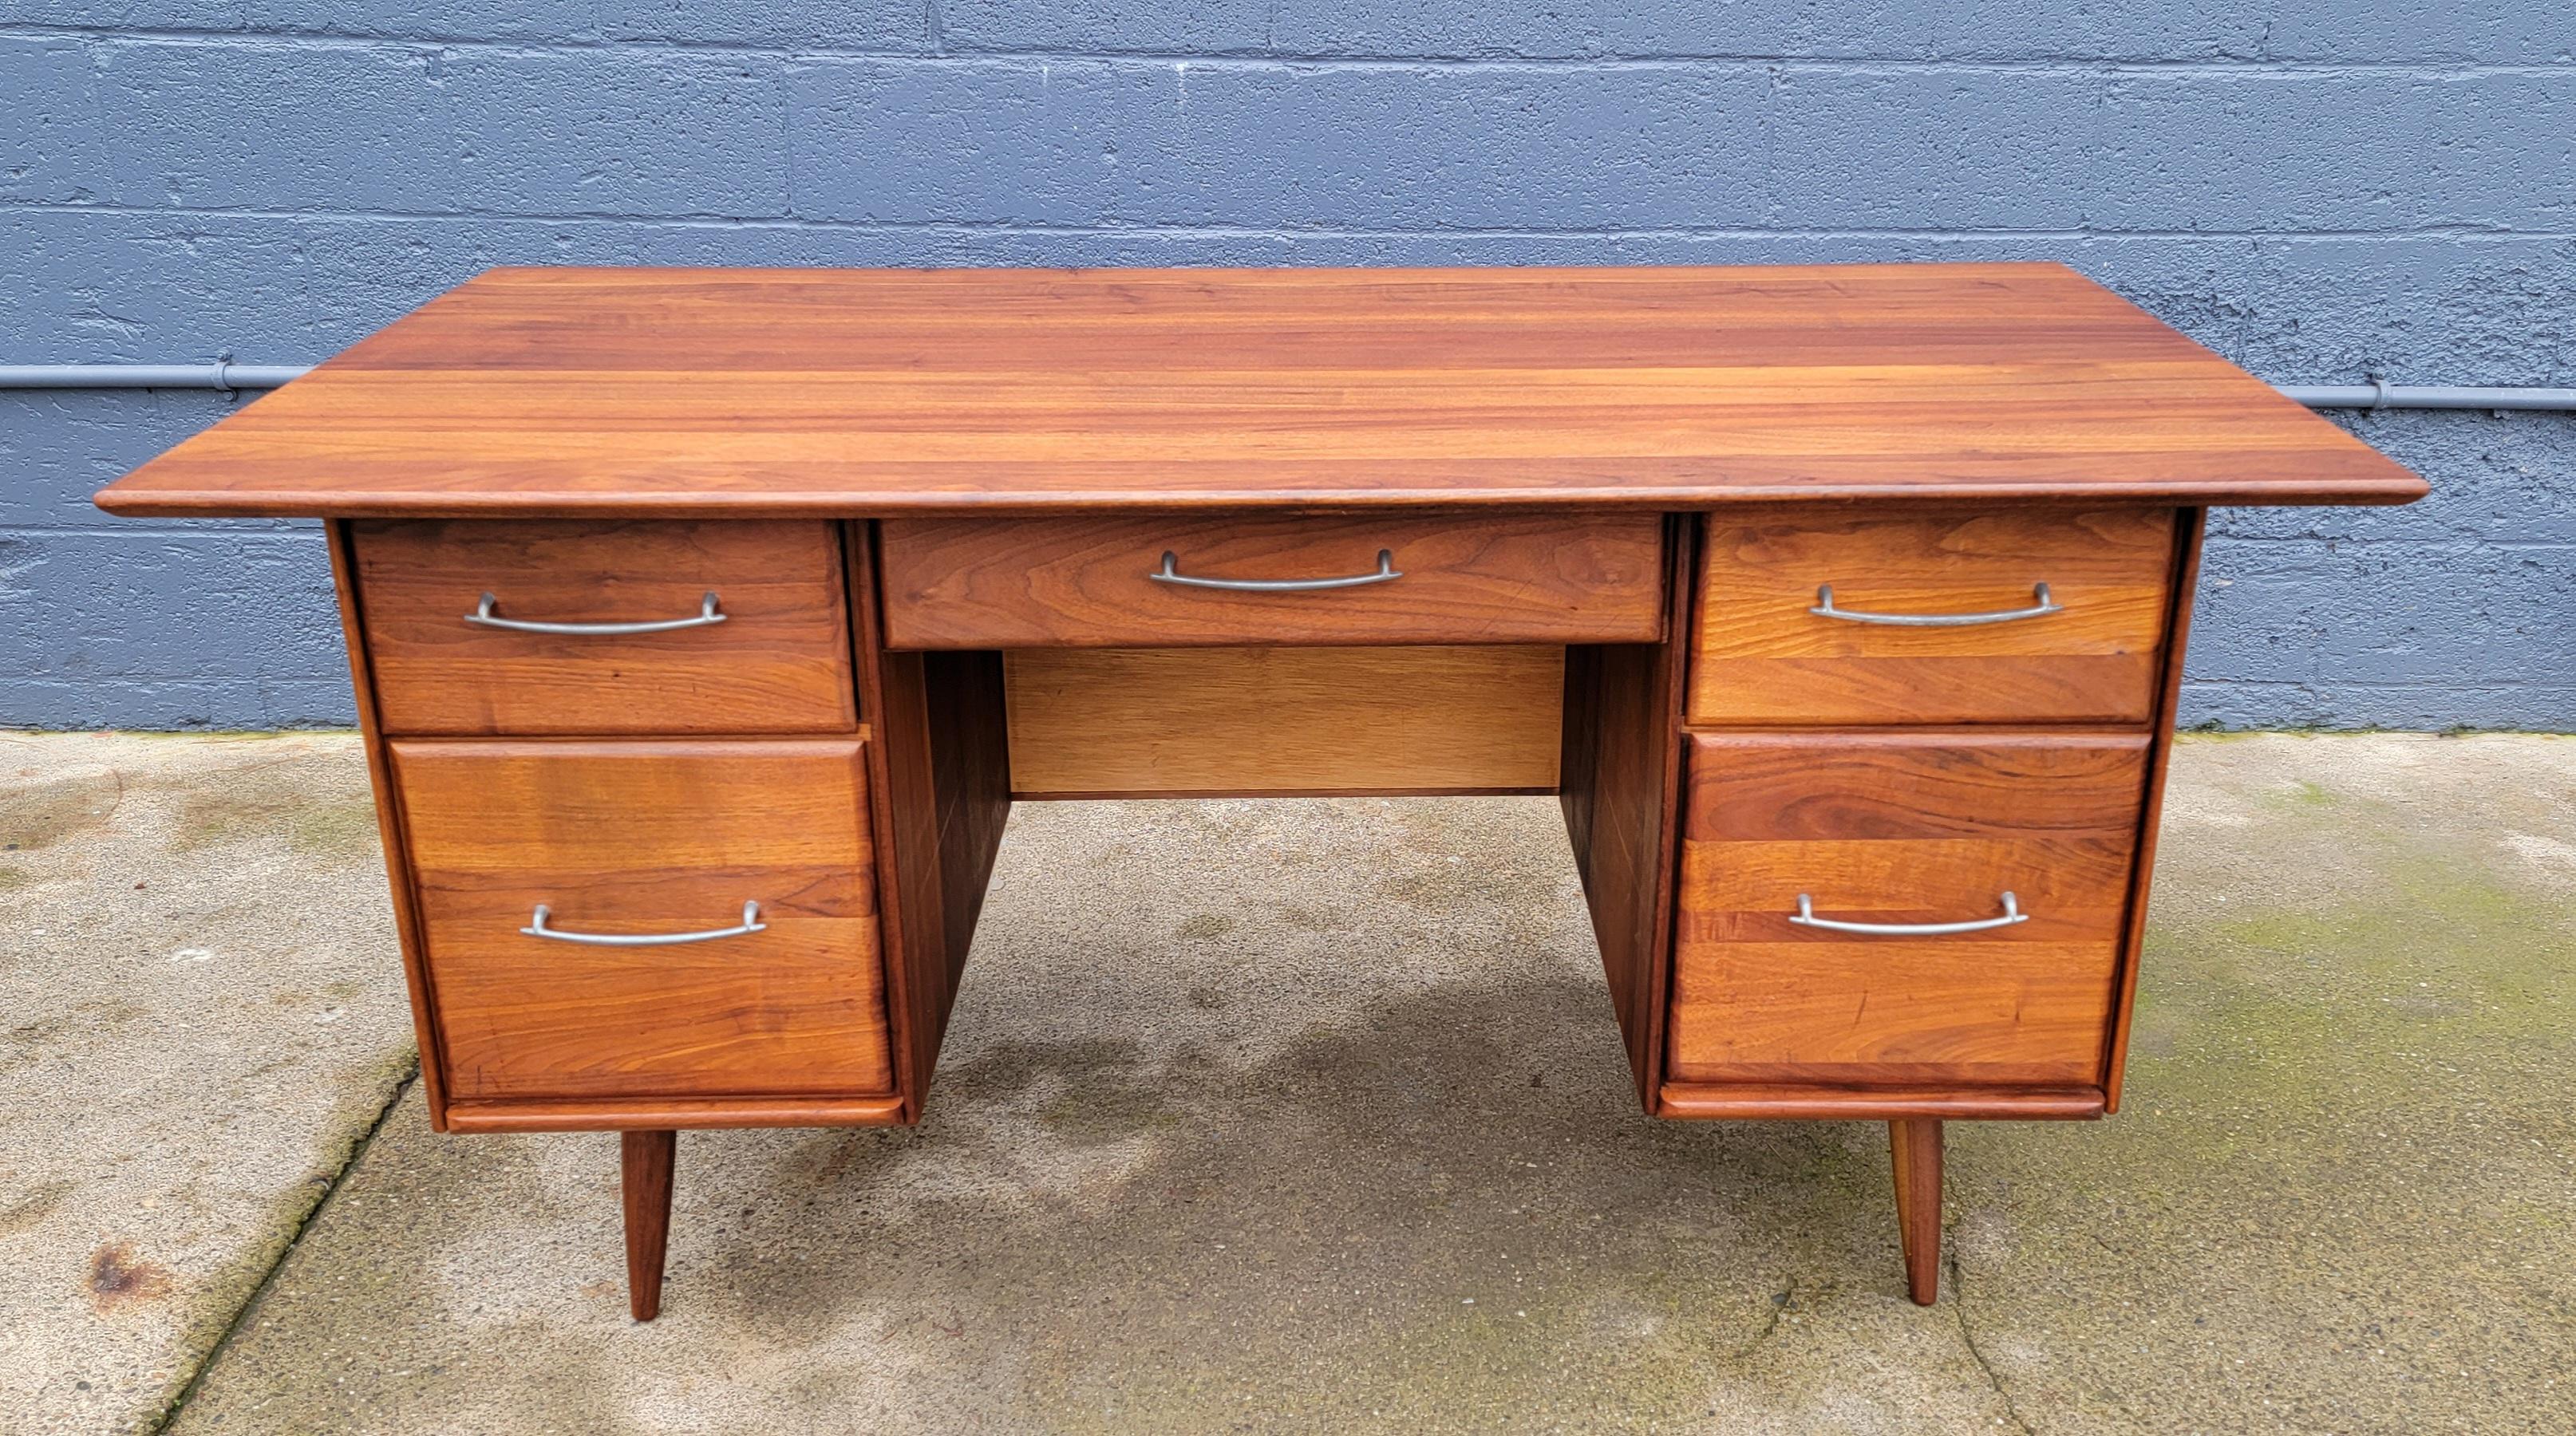 Mid-Century Modern desk by Prelude Furniture. Circa. 1960's. Quality crafted with the majority of woods in solid walnut and solid oak. Exceptional wood grain with depth and glow to original finish. Ample storage with large drawers. Classic peg leg